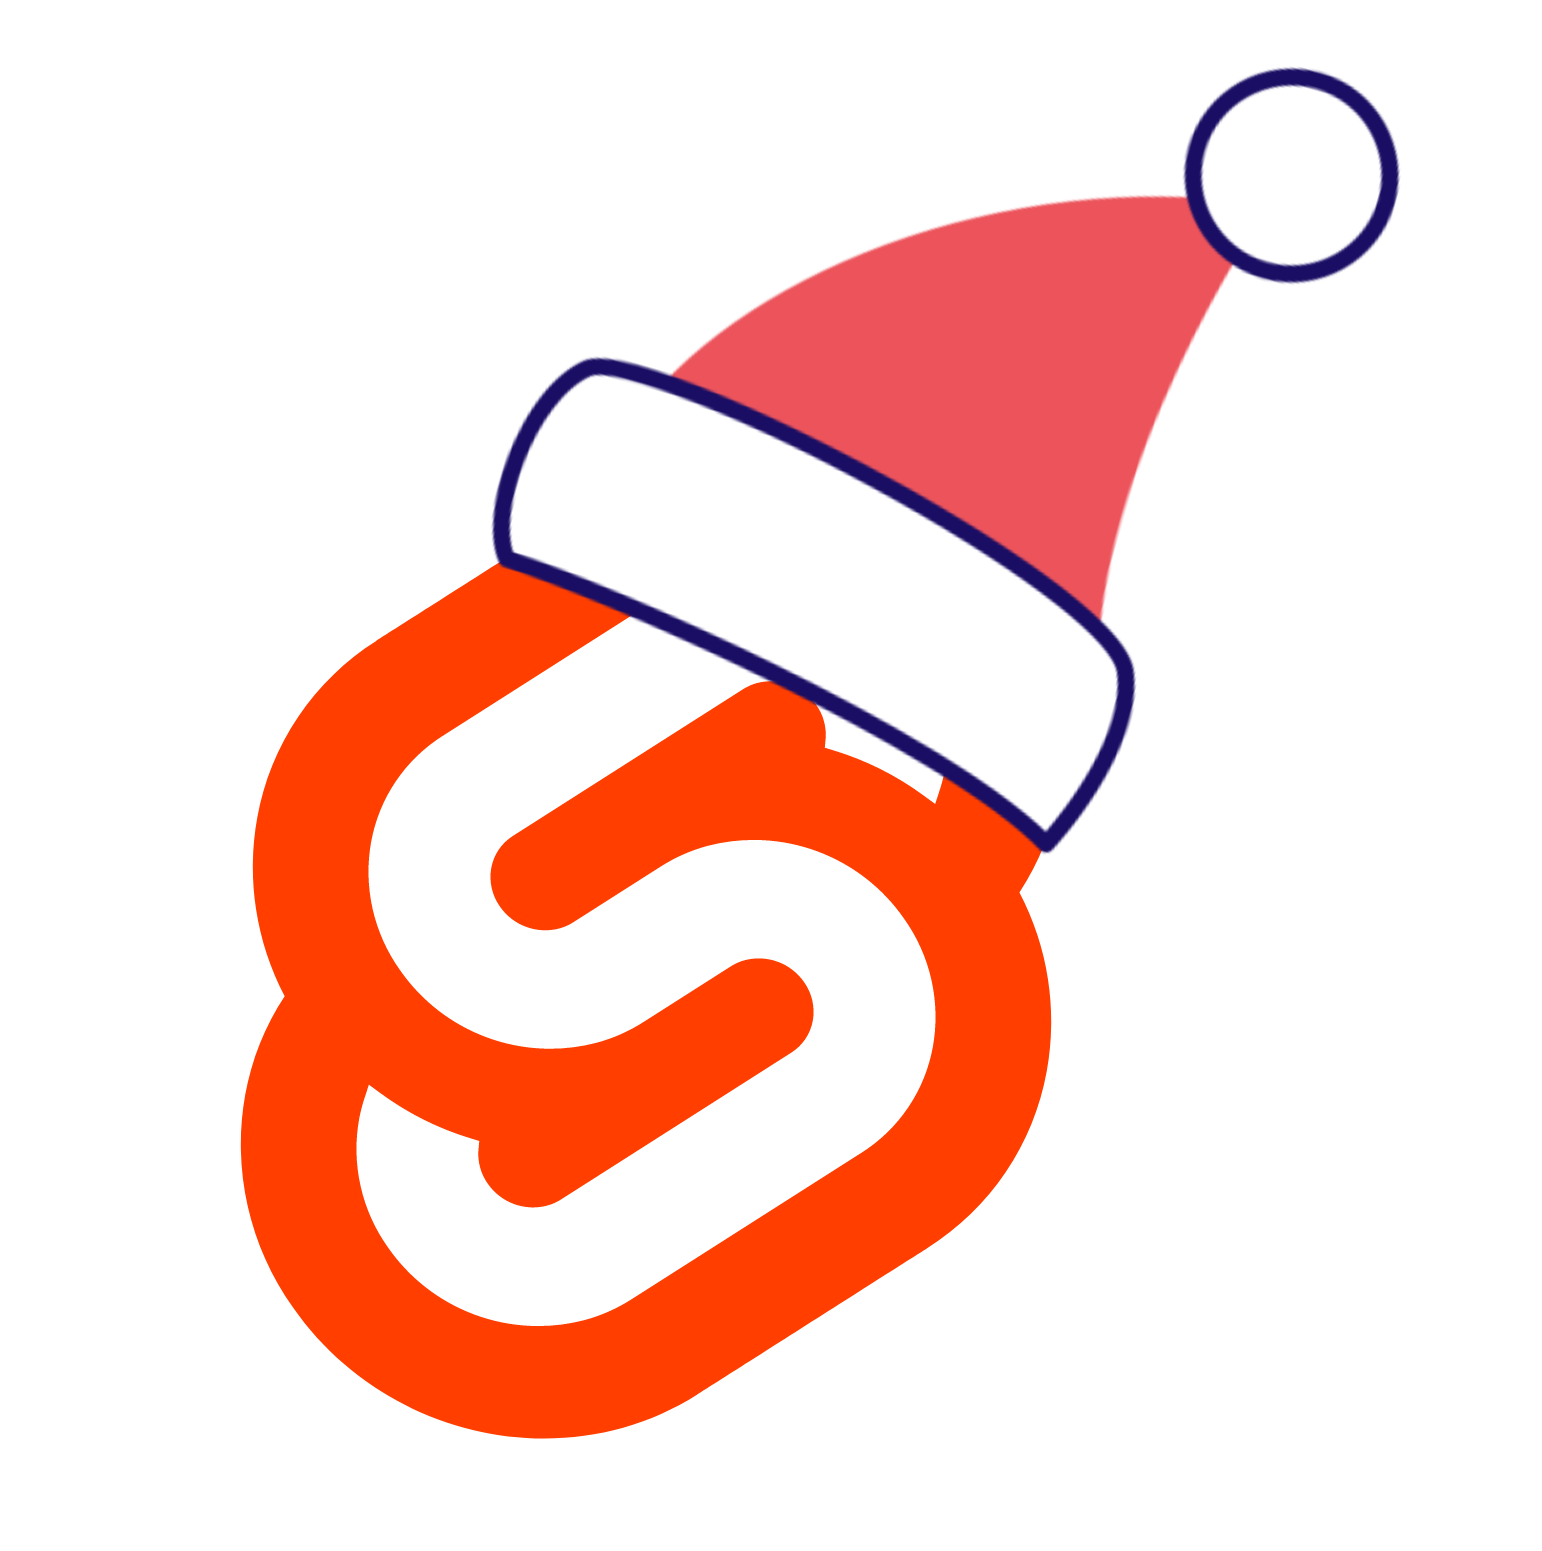 Svelte logo with a santa hat on top of it